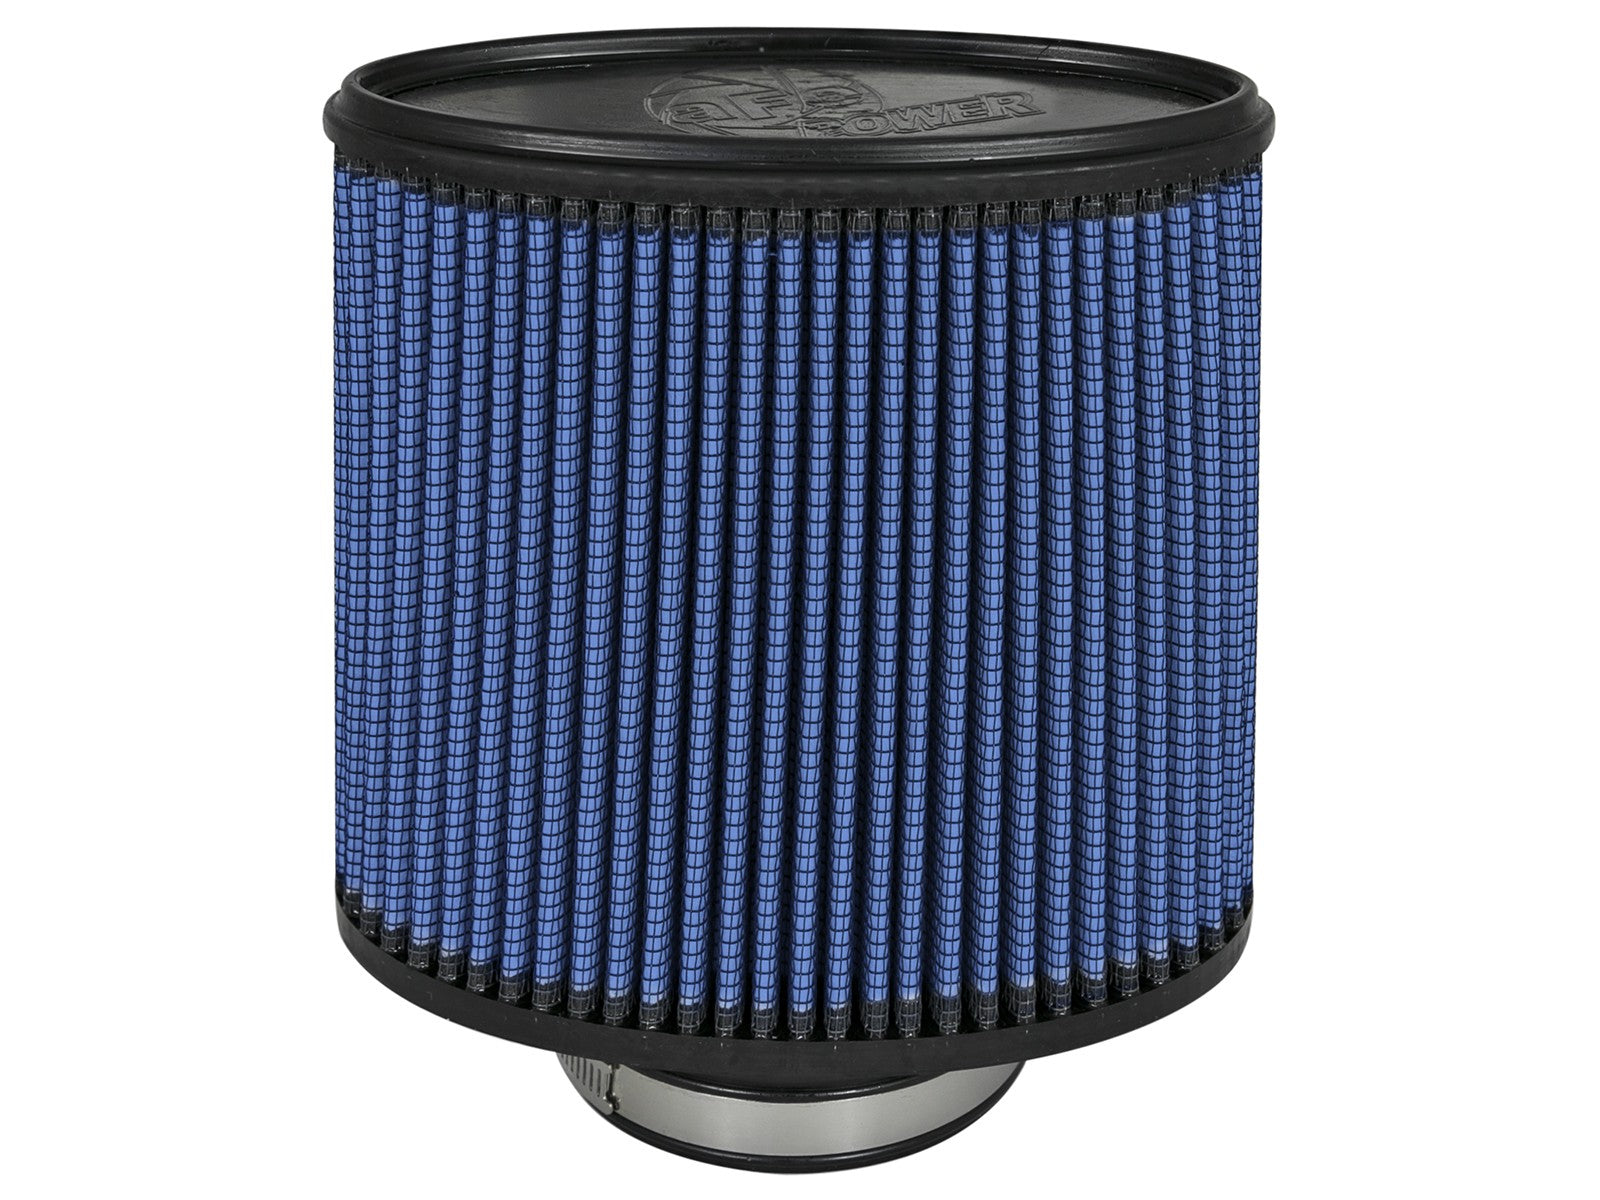 Magnum FORCE Intake Replacement Air Filter w/ Pro 5R Media 3-1/2 IN F x (7-1/2x5) IN B x (7x3) IN T x 7 IN H